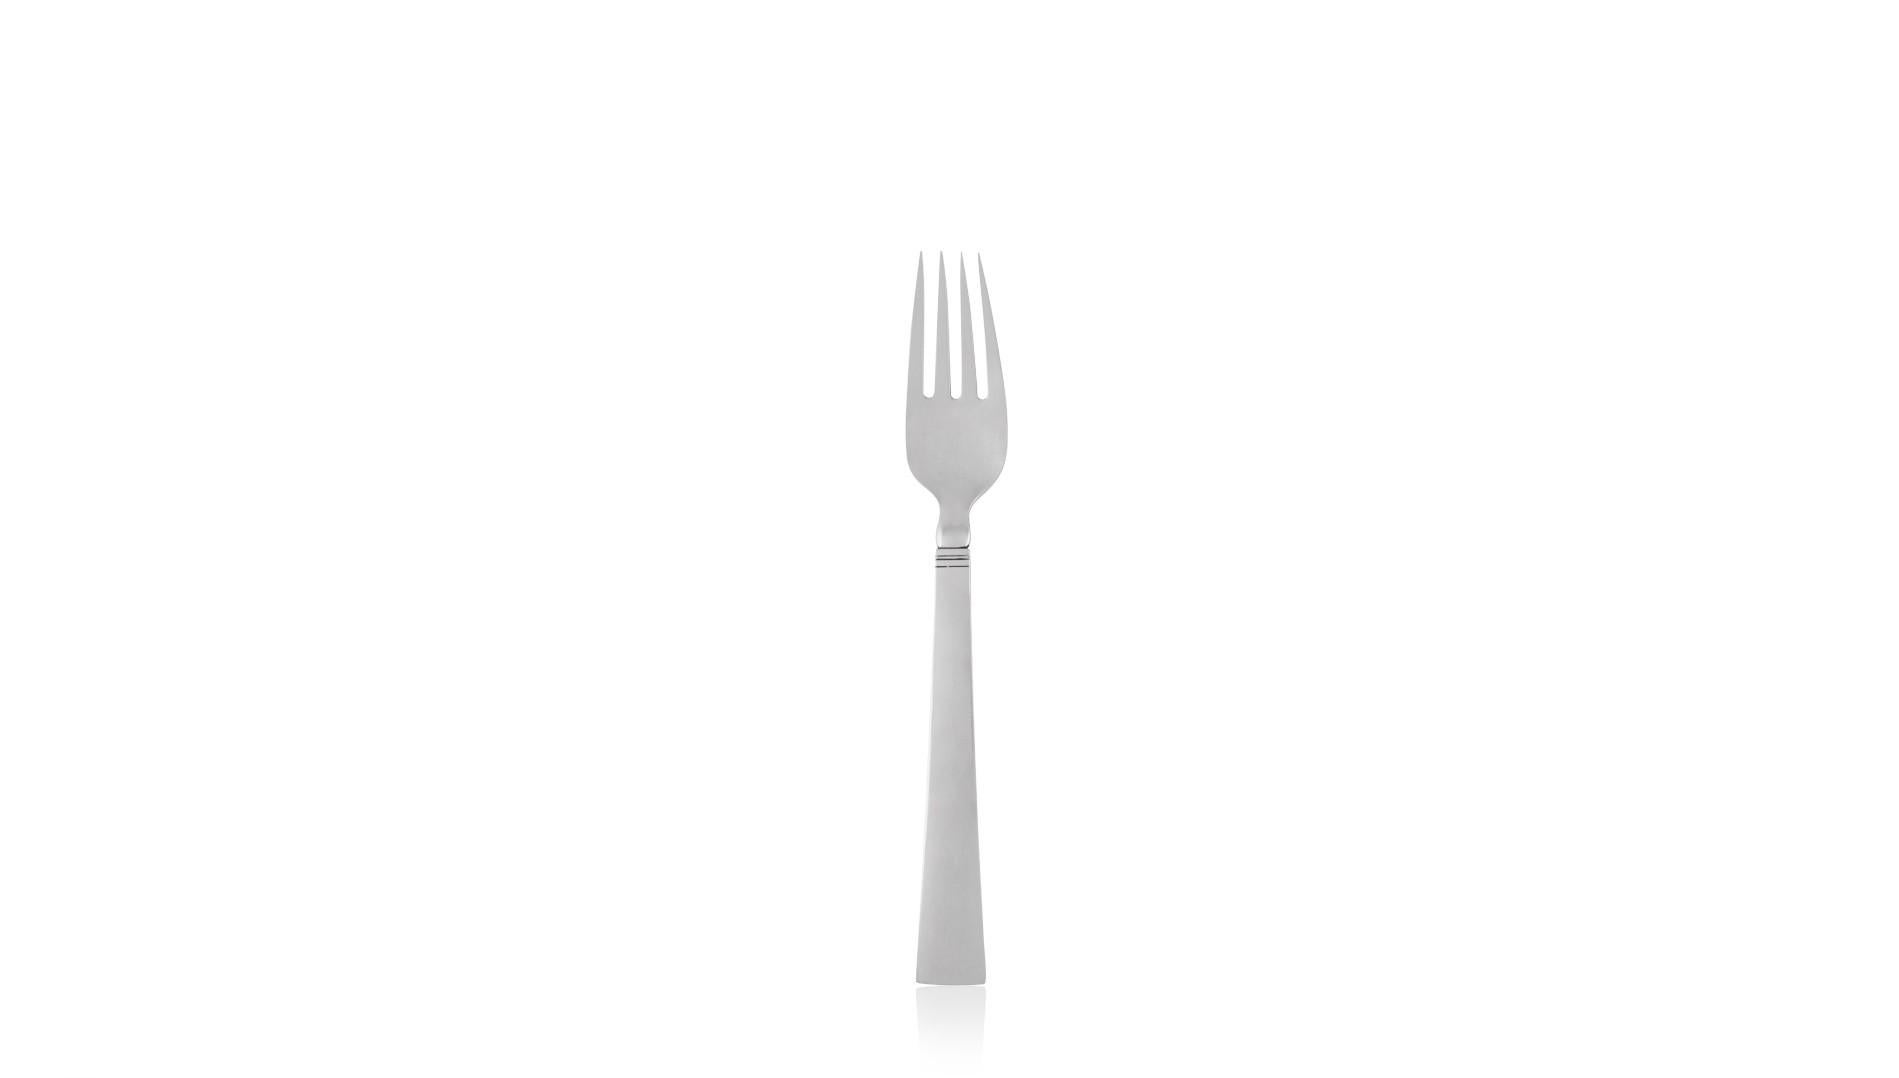 Sterling silver Georg Jensen luncheon/salad fork, item 022 in the Acadia pattern, design #46 by Ib Just Andersen from 1934.

Additional information:
Material: Sterling silver
Styles: Art Deco
Hallmarks: With Georg Jensen hallmark, made in